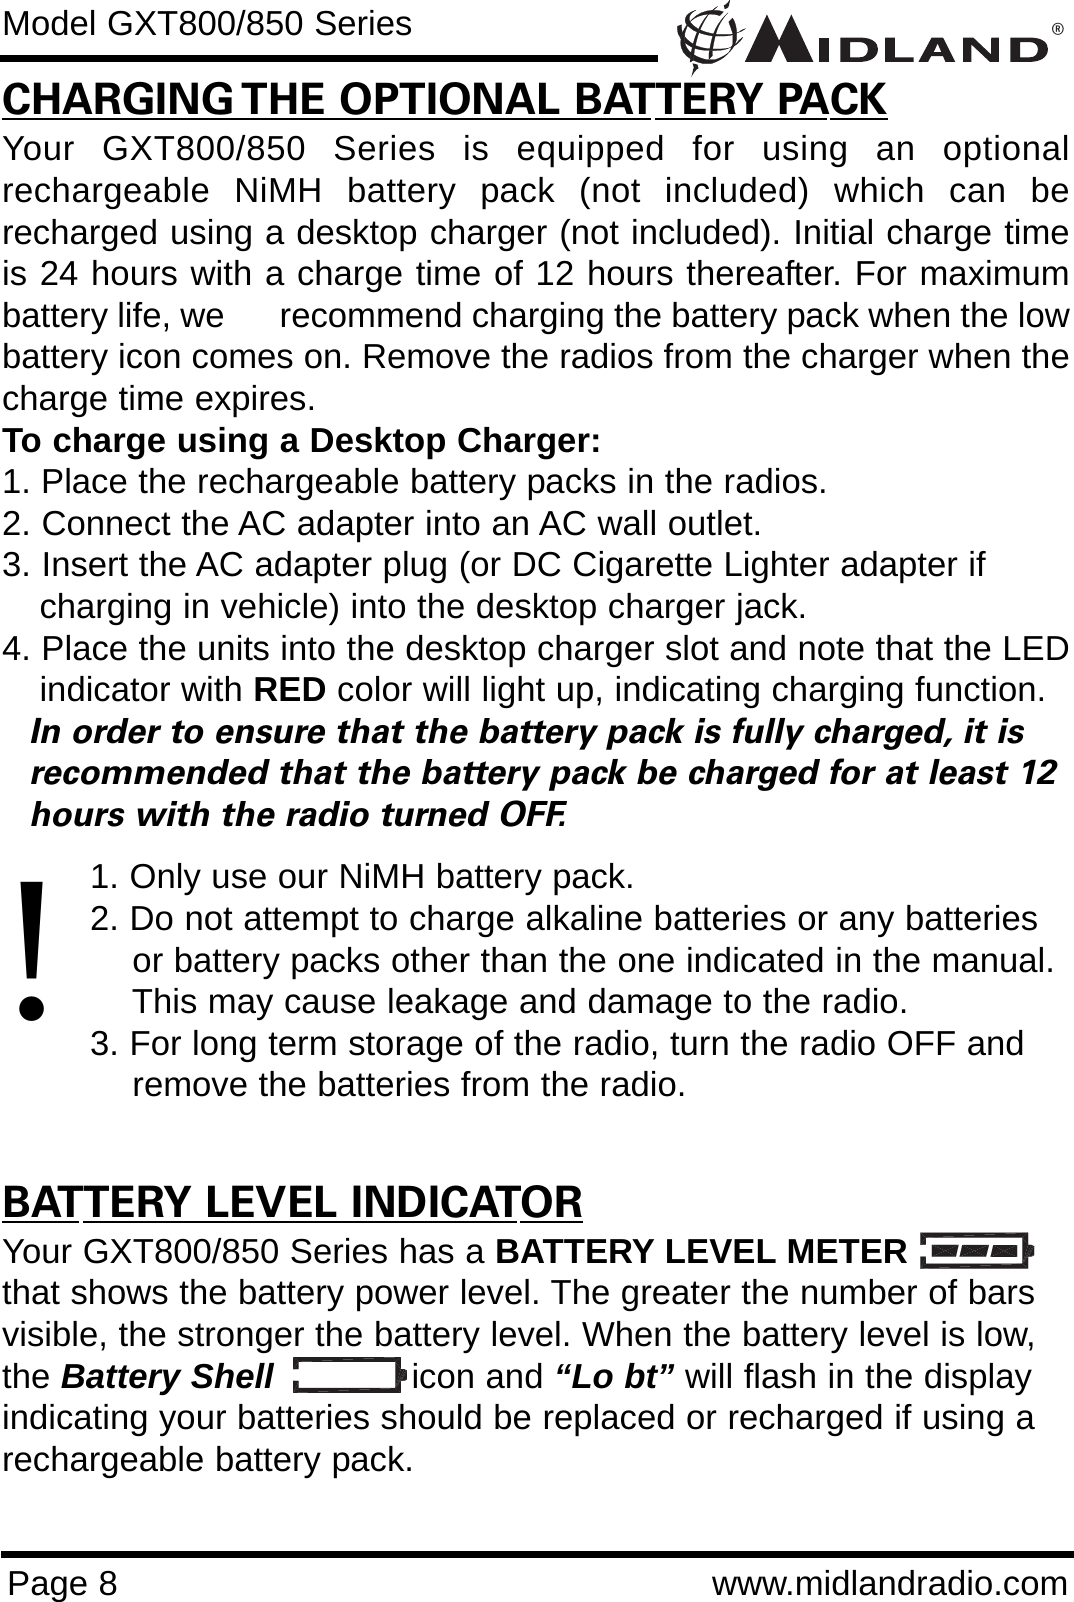 ®Page 8 www.midlandradio.comCHARGING THE OPTIONAL BATTERY PACKYour GXT800/850 Series is equipped for using an optionalrechargeable NiMH battery pack (not included) which can berecharged using a desktop charger (not included). Initial charge timeis 24 hours with a charge time of 12 hours thereafter. For maximumbattery life, we      recommend charging the battery pack when the lowbattery icon comes on. Remove the radios from the charger when thecharge time expires.To charge using a Desktop Charger:1. Place the rechargeable battery packs in the radios.2. Connect the AC adapter into an AC wall outlet.3. Insert the AC adapter plug (or DC Cigarette Lighter adapter if    charging in vehicle) into the desktop charger jack.4. Place the units into the desktop charger slot and note that the LEDindicator with RED color will light up, indicating charging function. In order to ensure that the battery pack is fully charged, it is  recommended that the battery pack be charged for at least 12 hours with the radio turned OFF.1. Only use our NiMH battery pack.2. Do not attempt to charge alkaline batteries or any batteries or battery packs other than the one indicated in the manual. This may cause leakage and damage to the radio.3. For long term storage of the radio, turn the radio OFF and remove the batteries from the radio.BATTERY LEVEL INDICATORYour GXT800/850 Series has a BATTERY LEVEL METERthat shows the battery power level. The greater the number of barsvisible, the stronger the battery level. When the battery level is low,the Battery Shell icon and “Lo bt” will flash in the displayindicating your batteries should be replaced or recharged if using arechargeable battery pack.Model GXT800/850 Series!